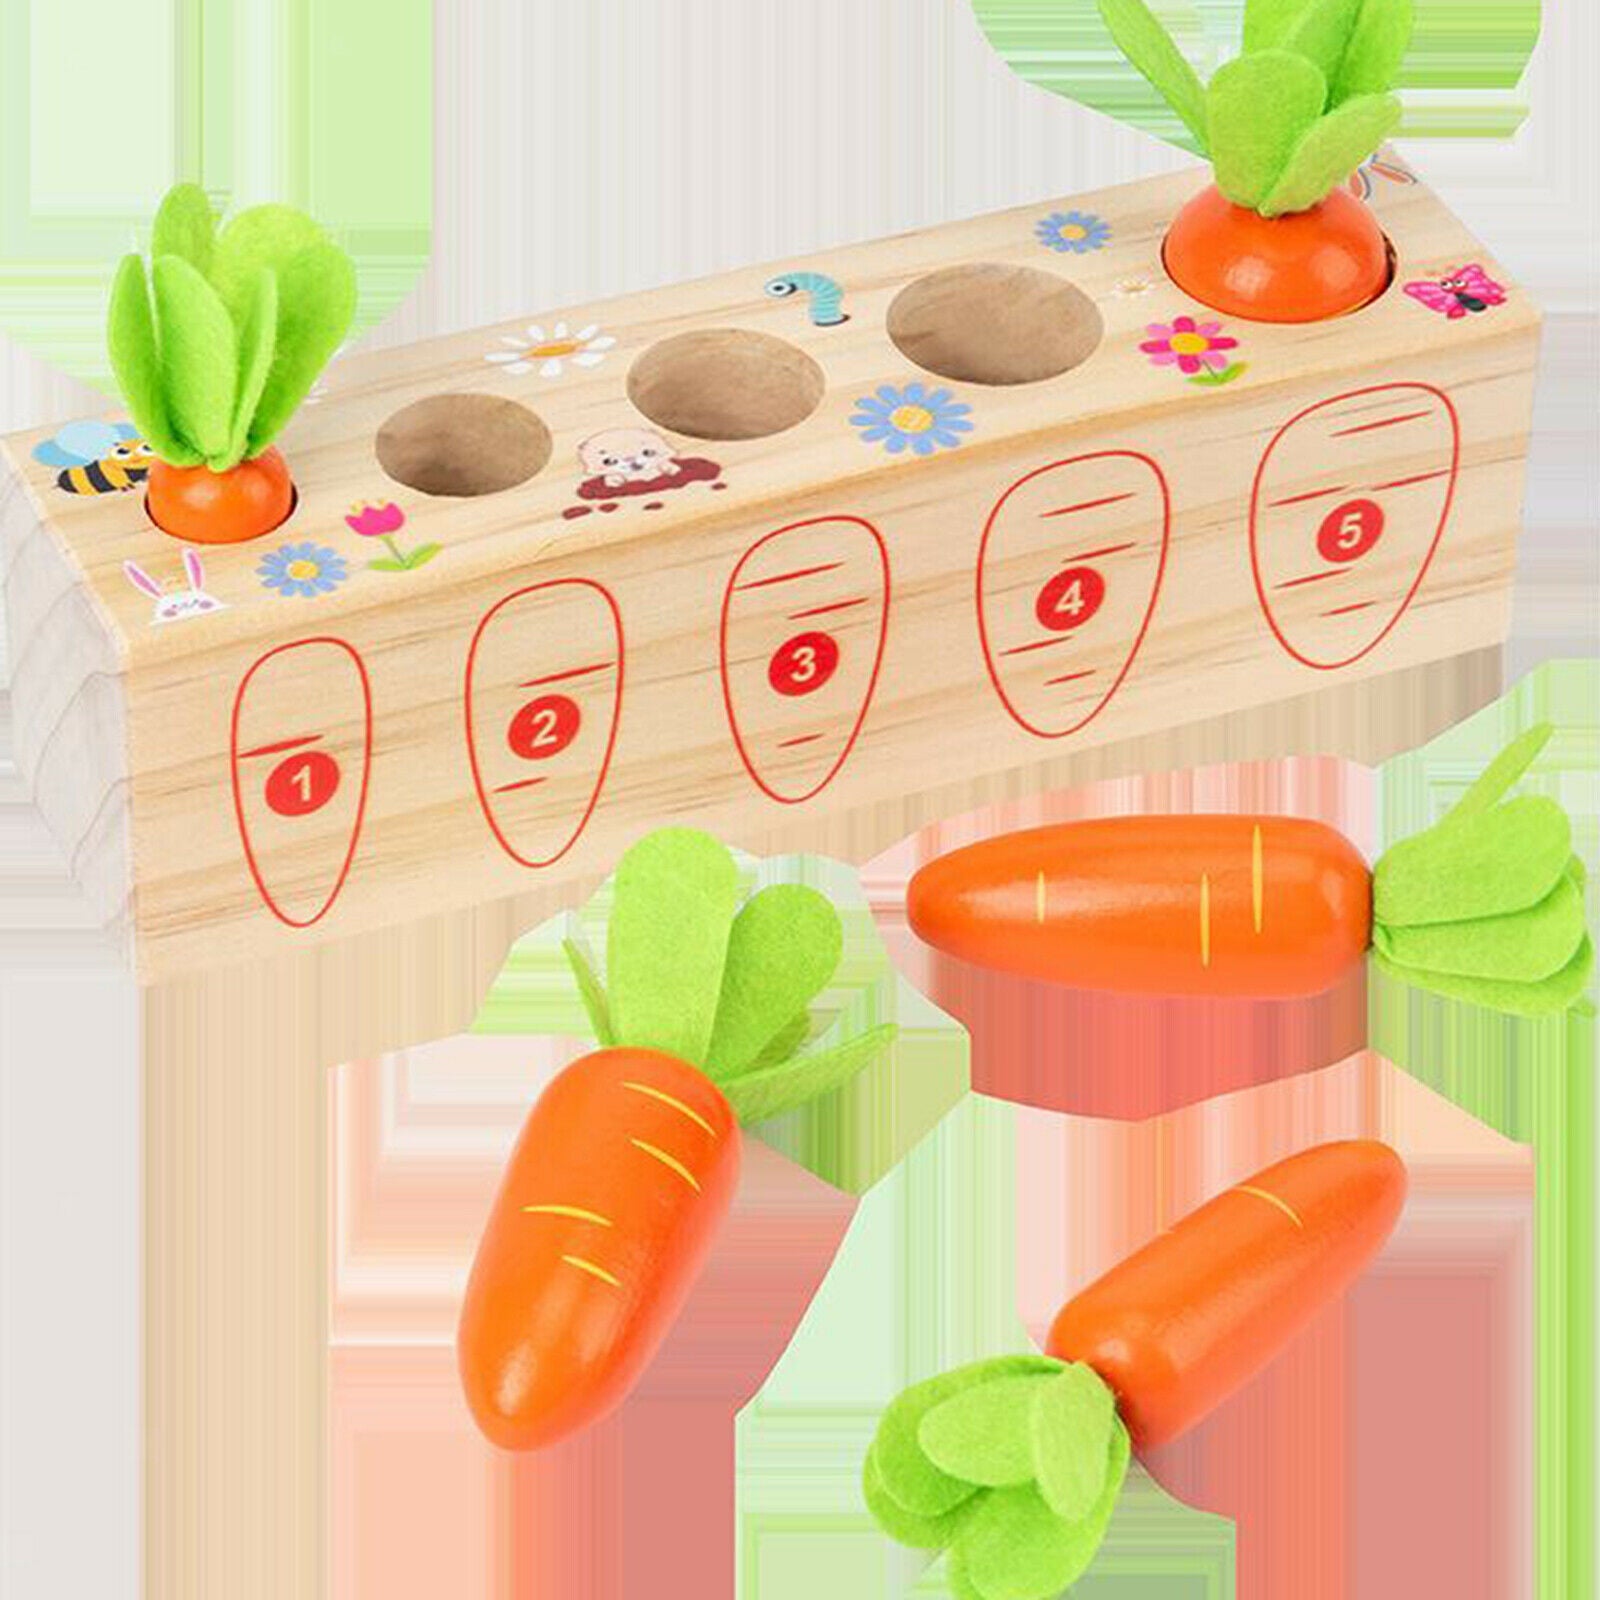 Fun Wooden Carrots Harvest Matching Game Toys Early Learning for 4-6 Years Old